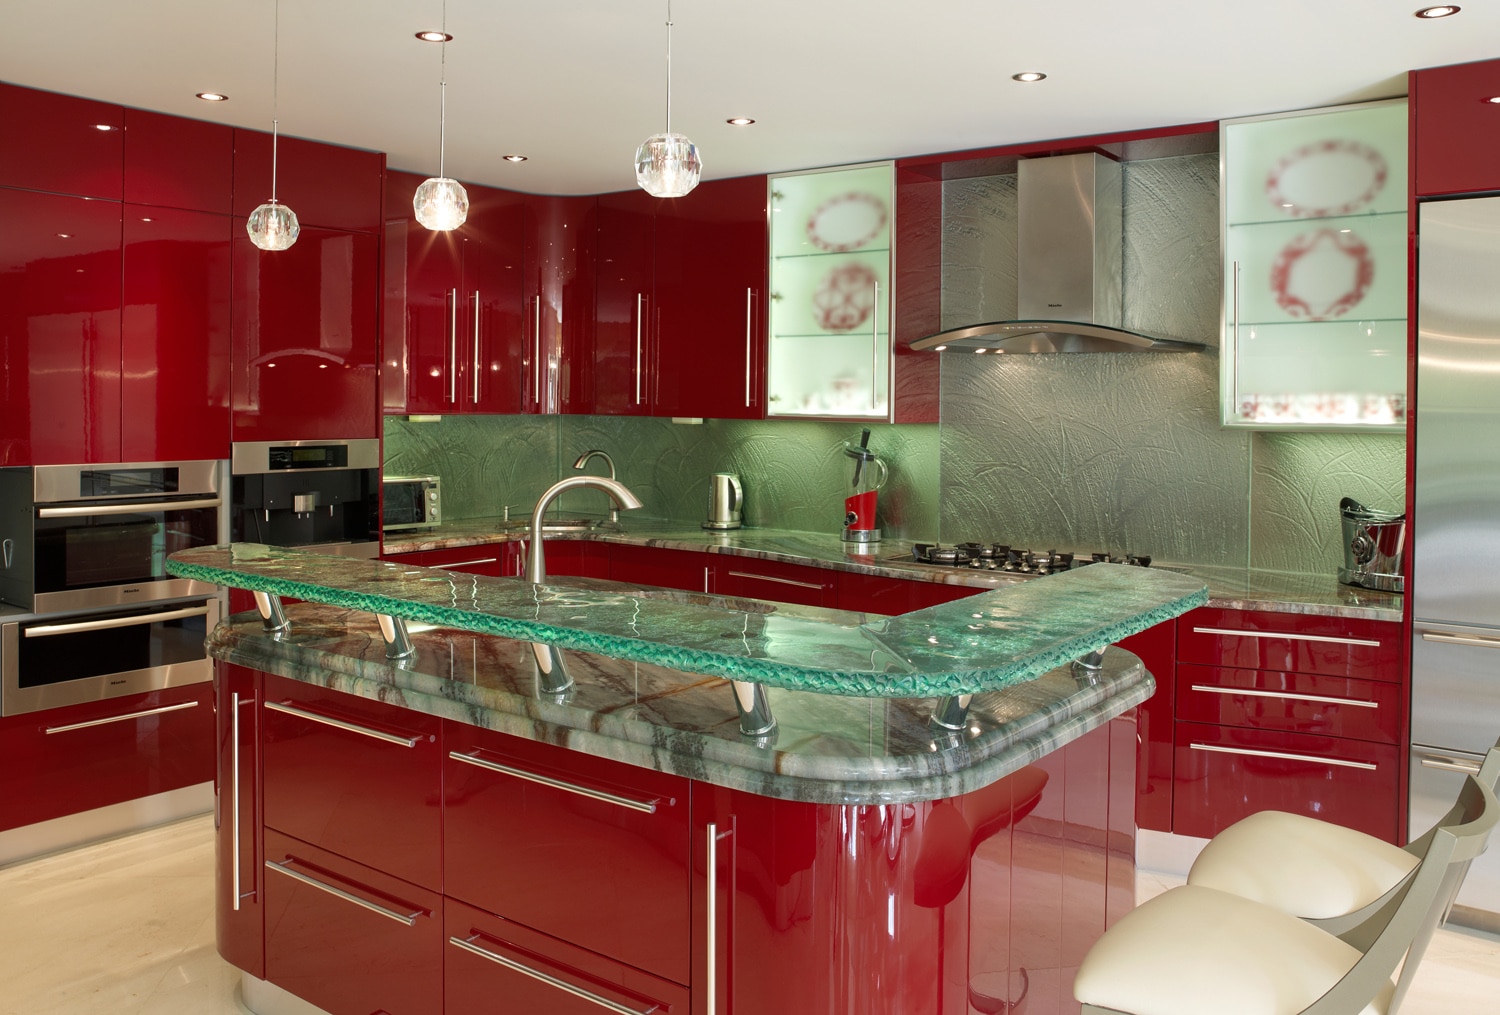 glass countertops kitchen modern unusual counter bar kitchens materials countertop raised decorating breakfast material red space latest cabinets trends sink